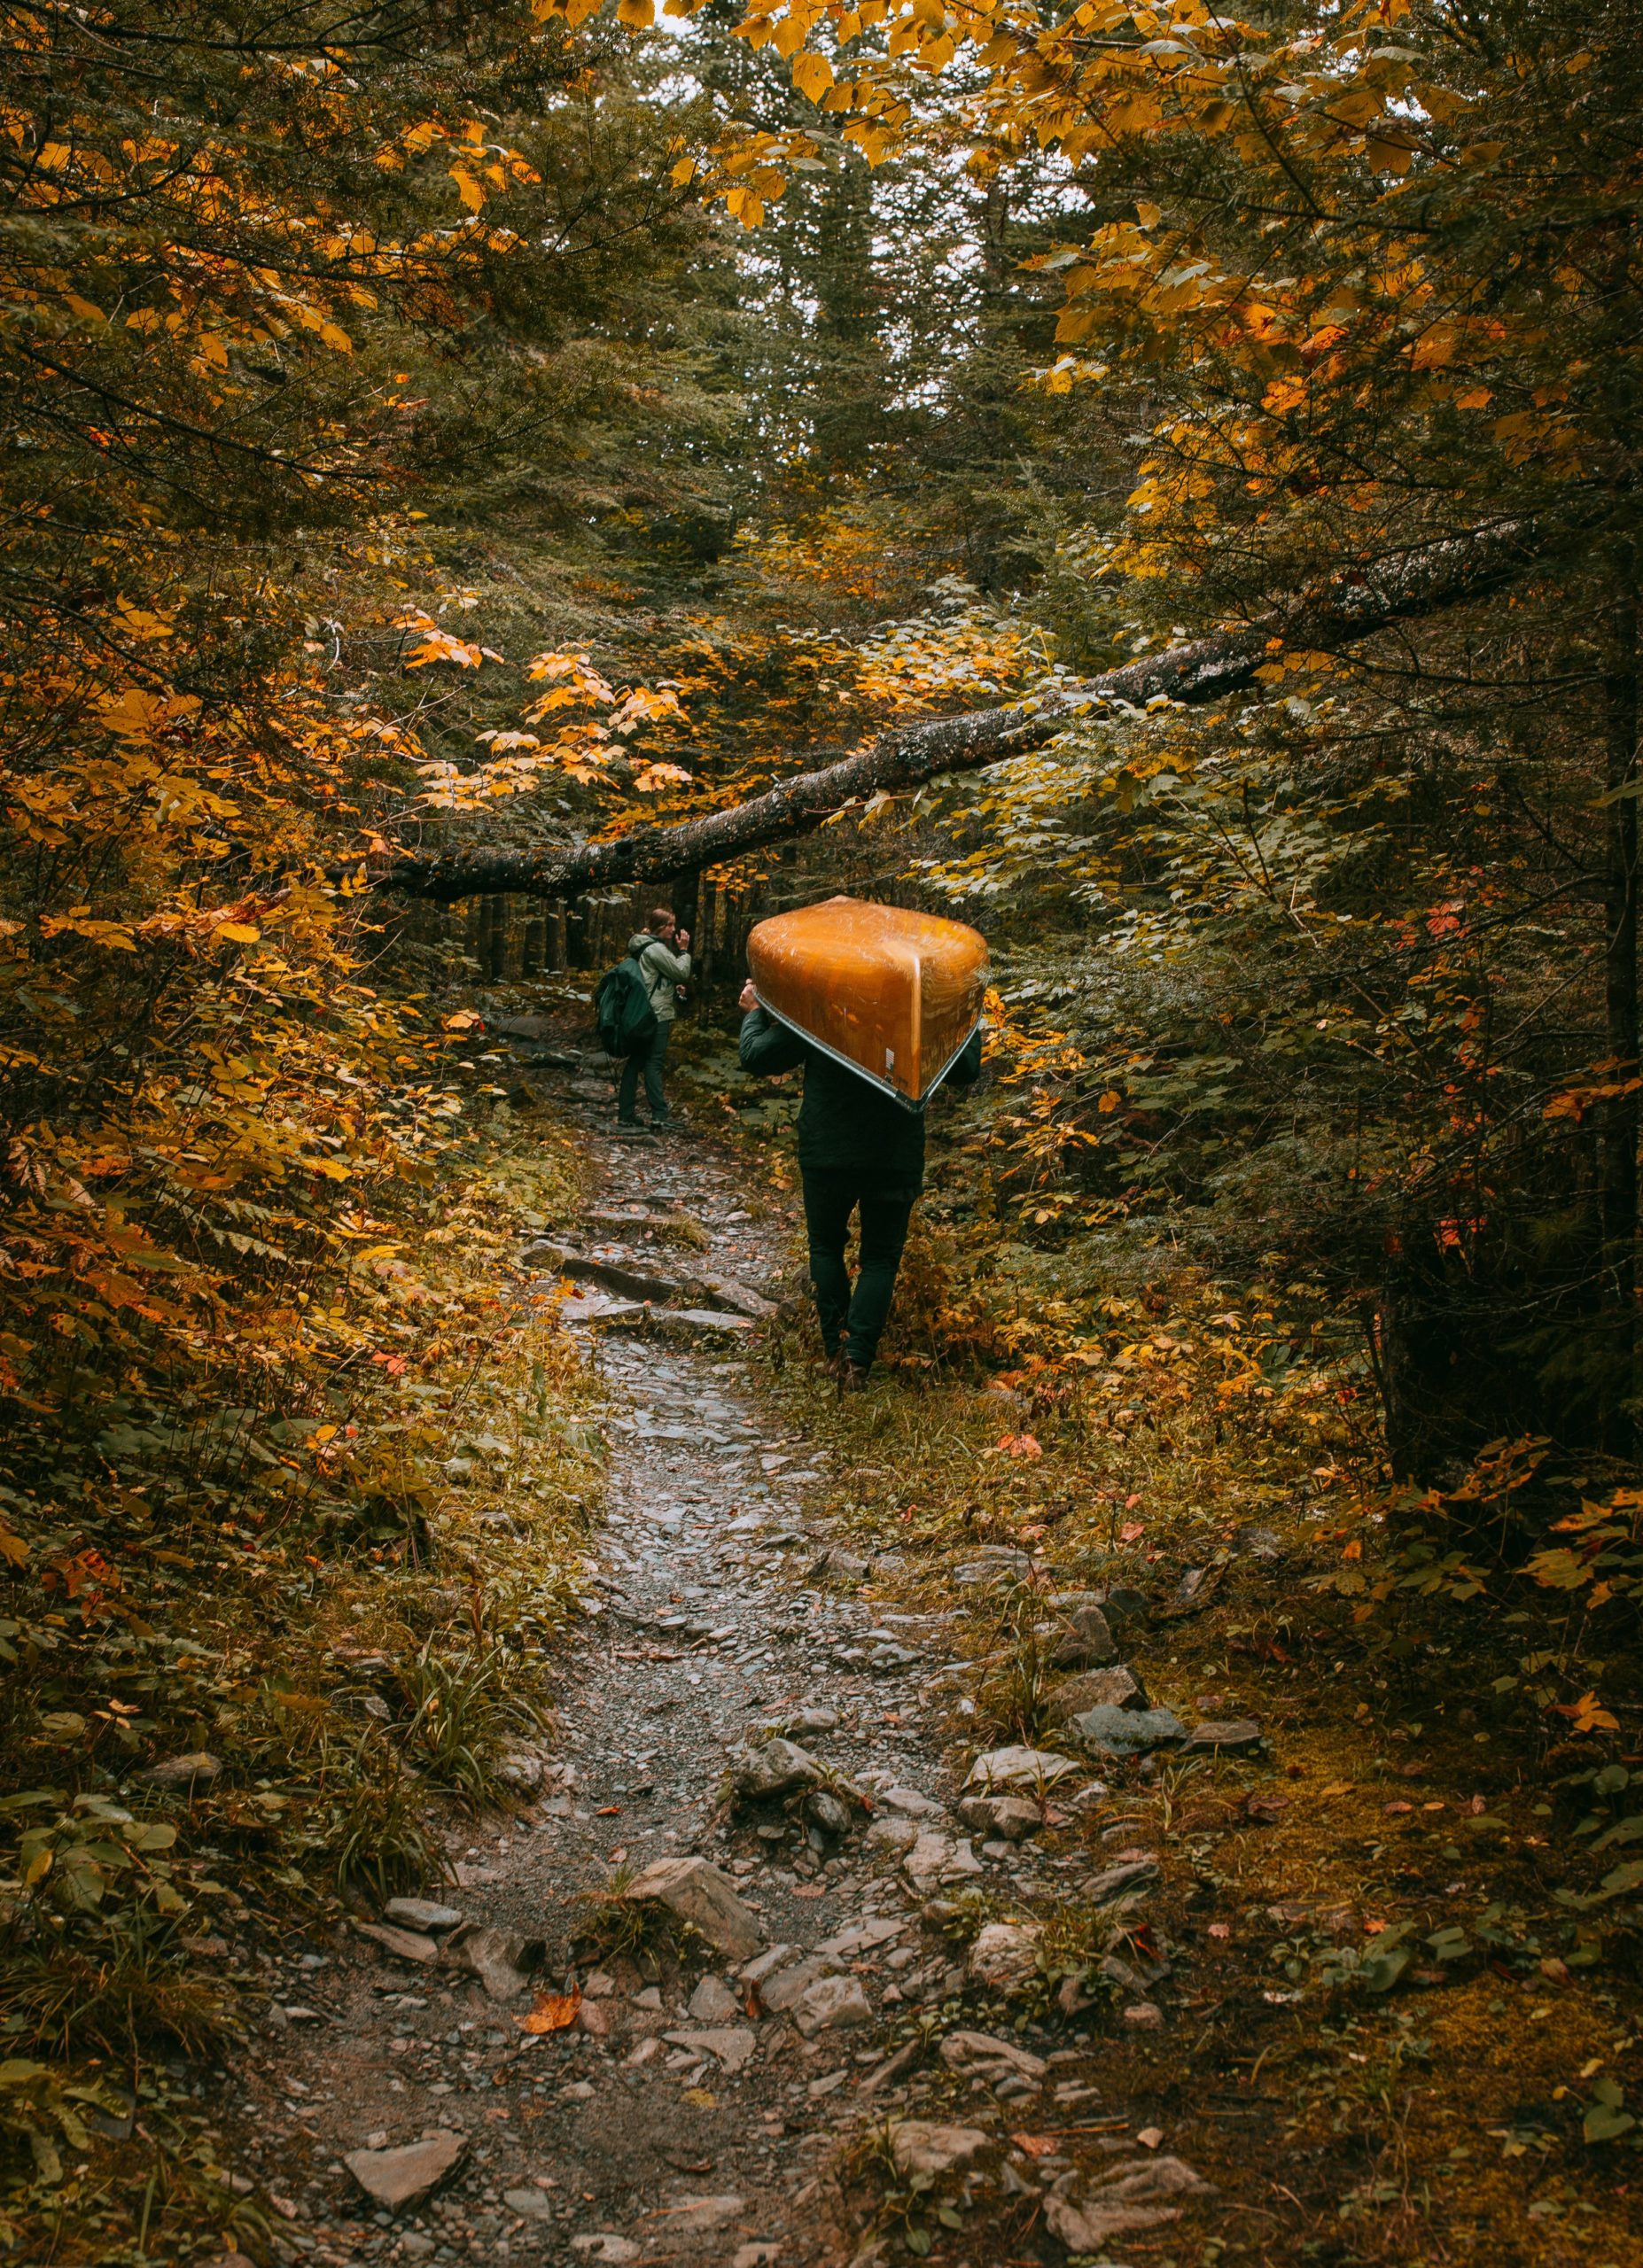 A man portaging with his canoe and a woman with a backpack in the forest